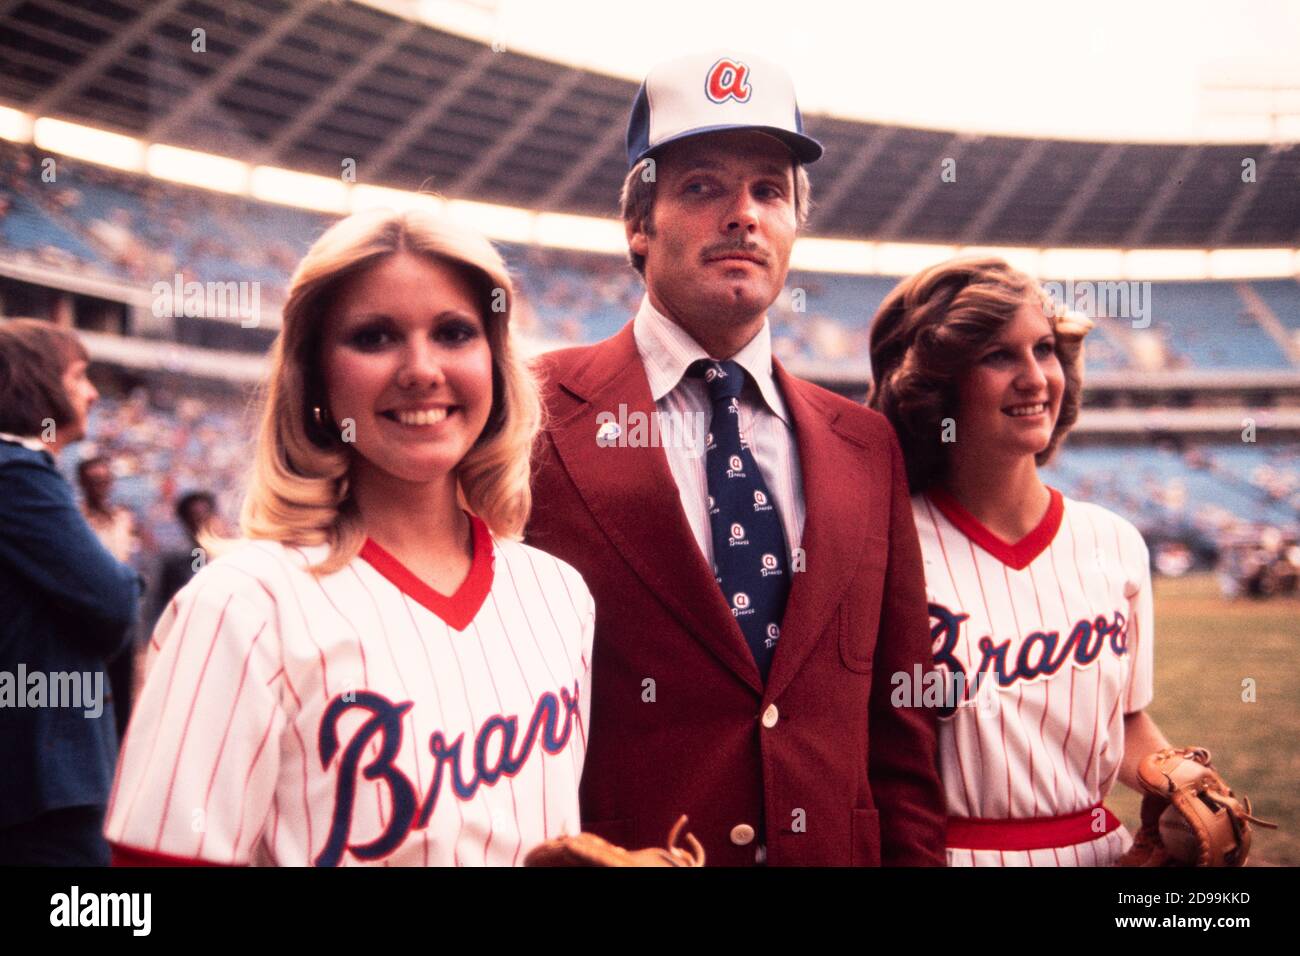 Ted Turner, millionaire broadcaster and owner of the Atlanta Braves baseball  team takes the field at Atlanta Fulton County Stadium in April 1976  escorted by pretty ballgirls and chomping on his trademark